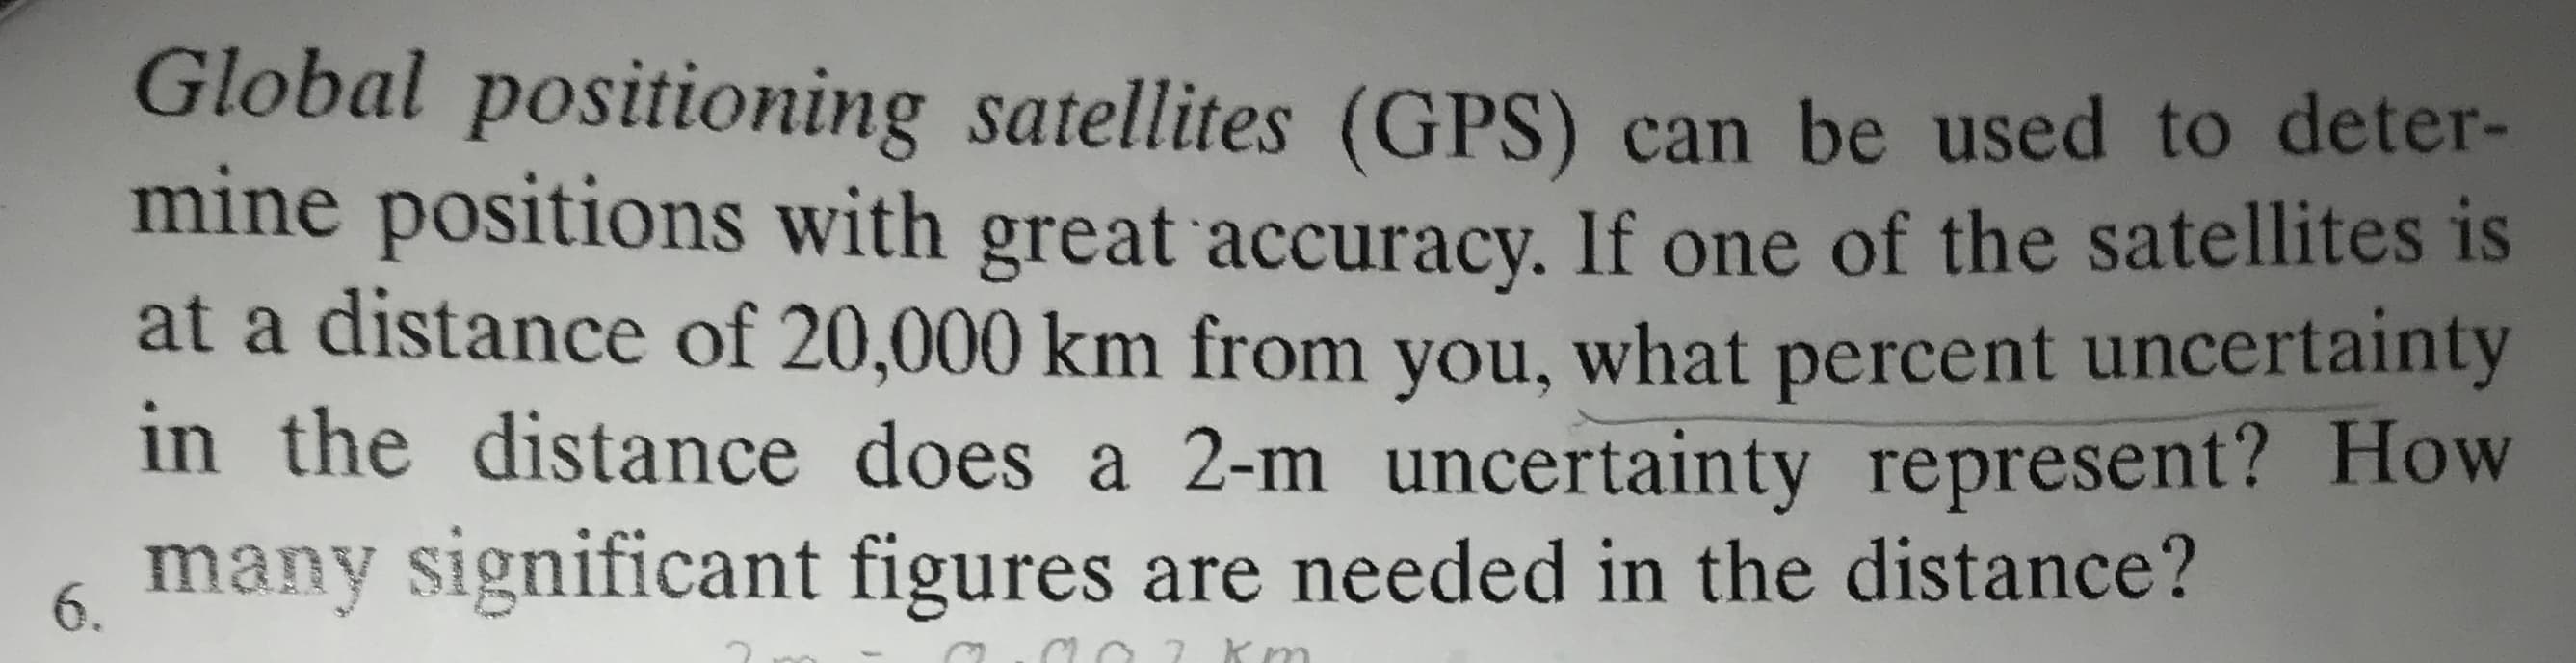 Global positioning satellites (GPS) can be used to deter-
mine positions with great accuracy. If one of the satellites is
at a distance of 20,000 km from what percent uncertainty
you,
in the distance does a 2-m uncertainty represent? How
many significant figures are needed in the distance?
